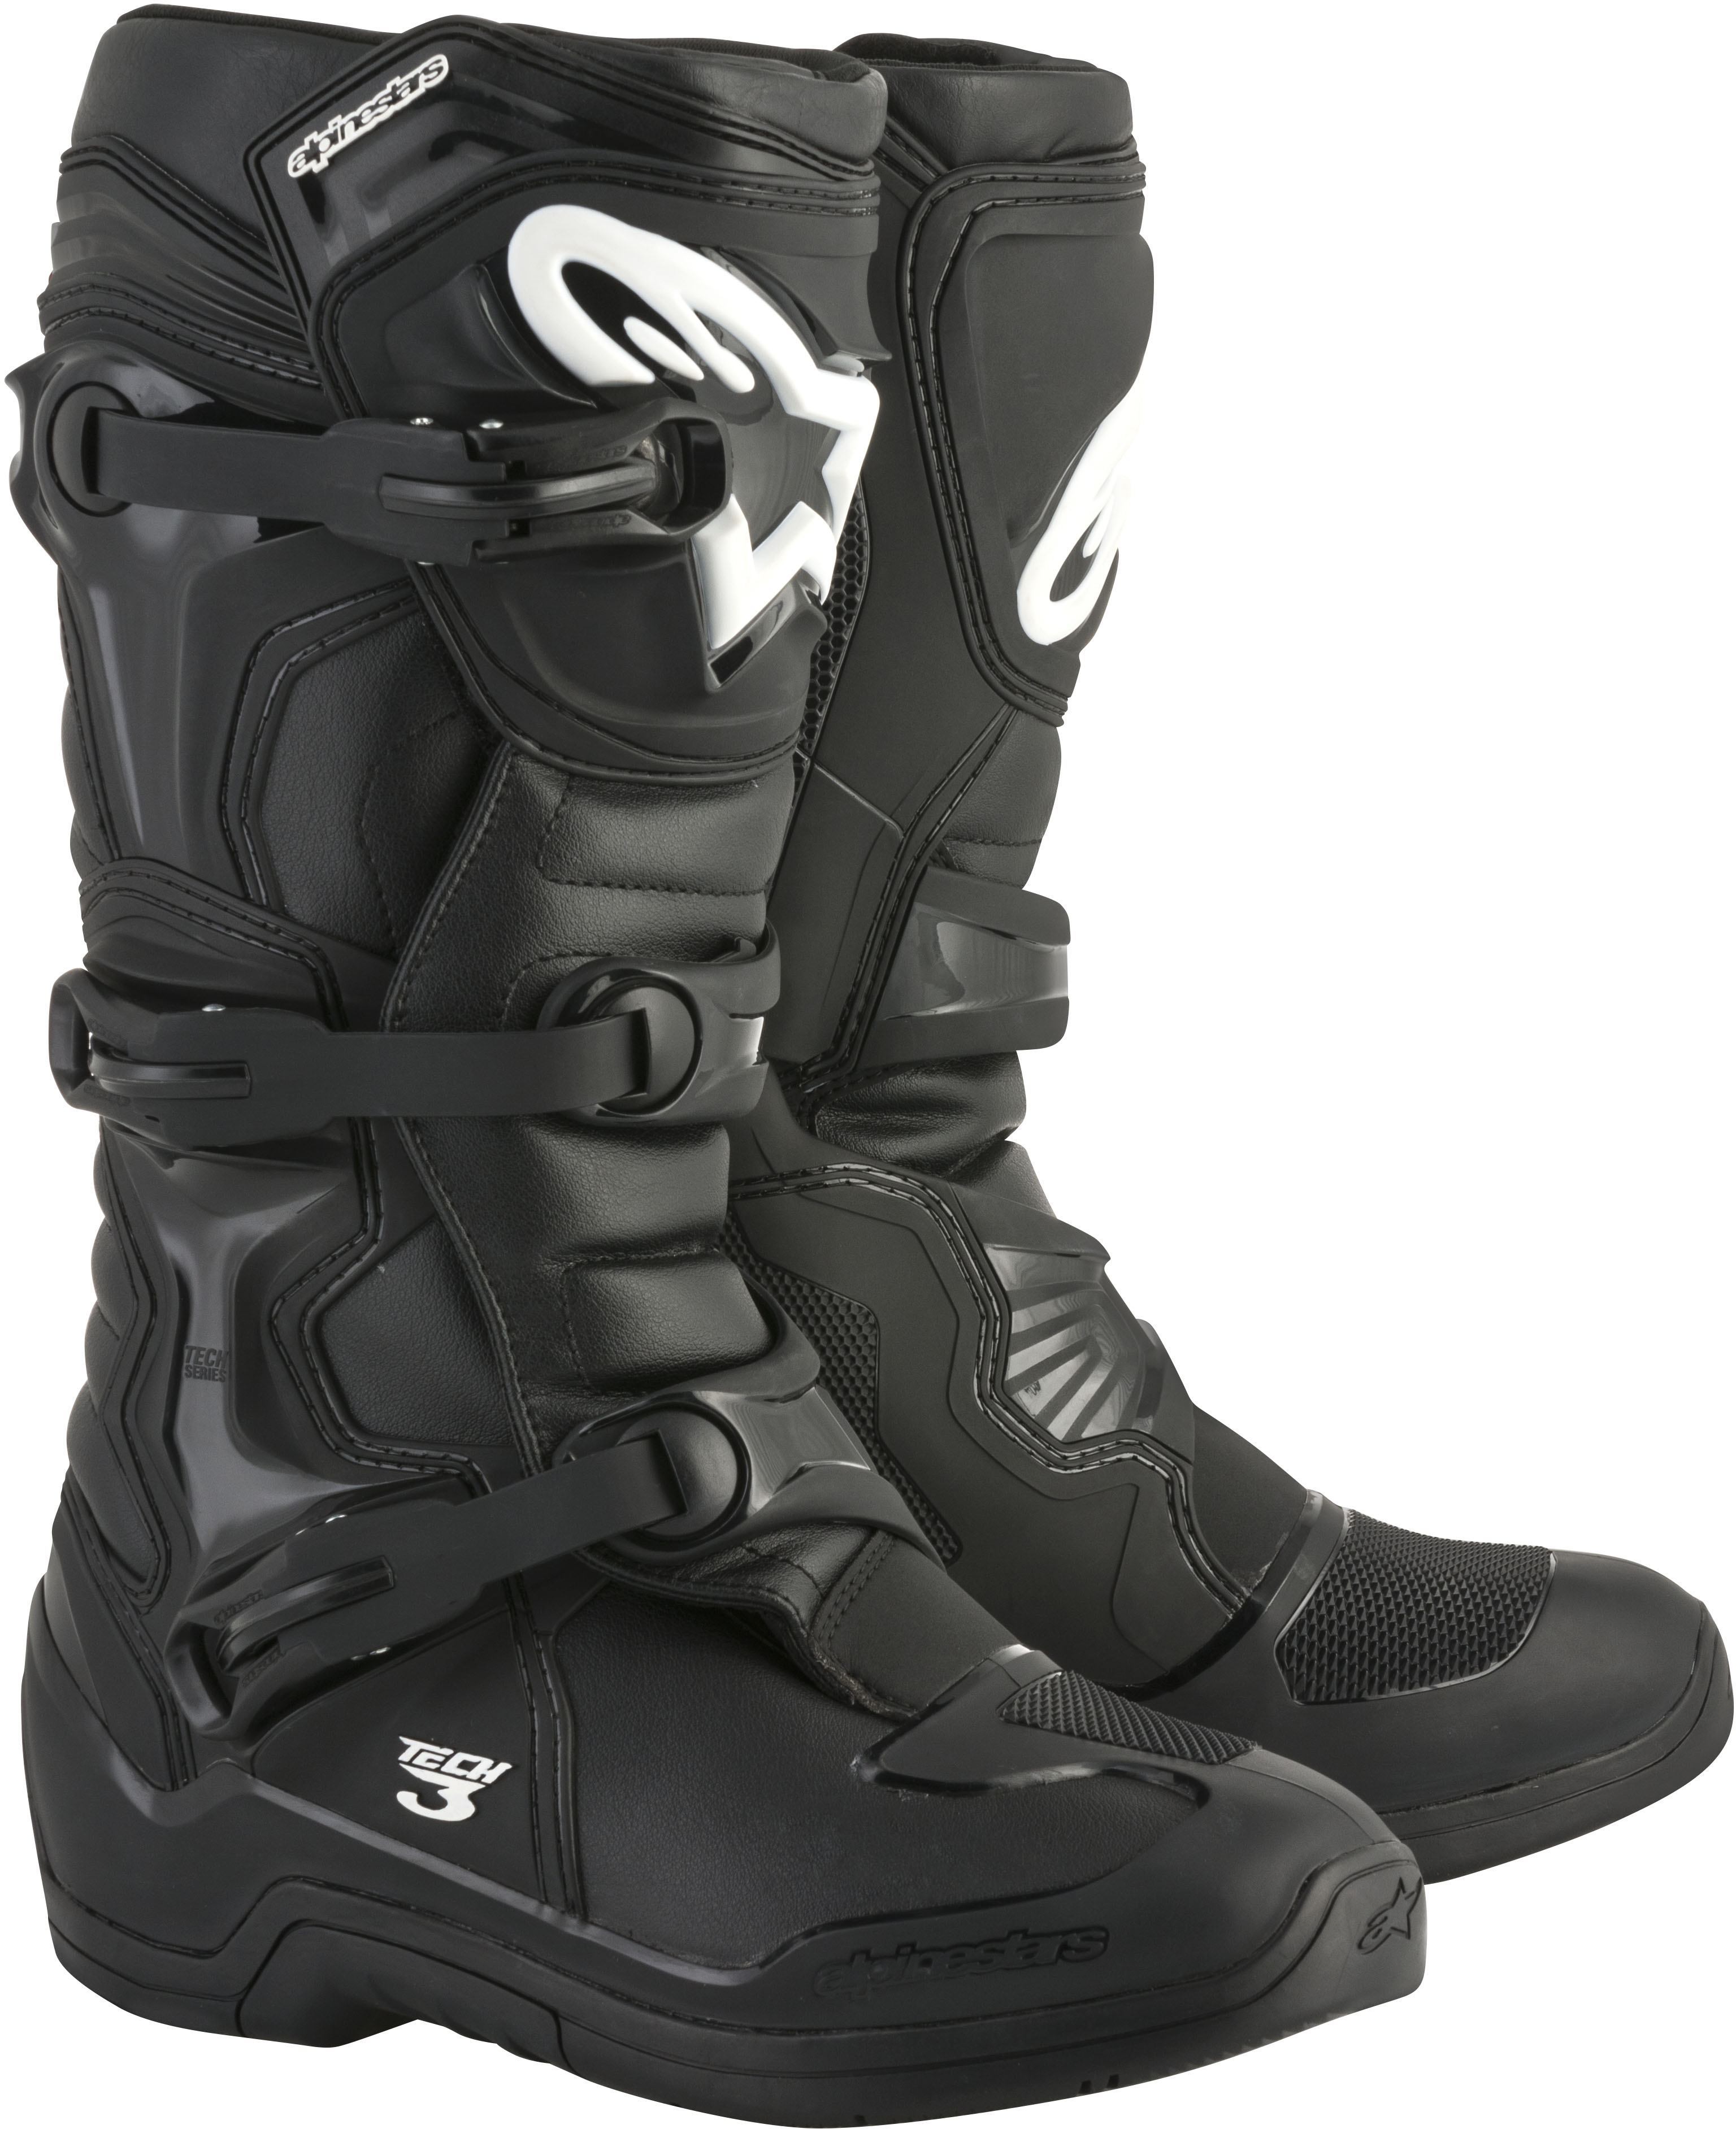 Tech 3 Boots Black Size 15 - Click Image to Close